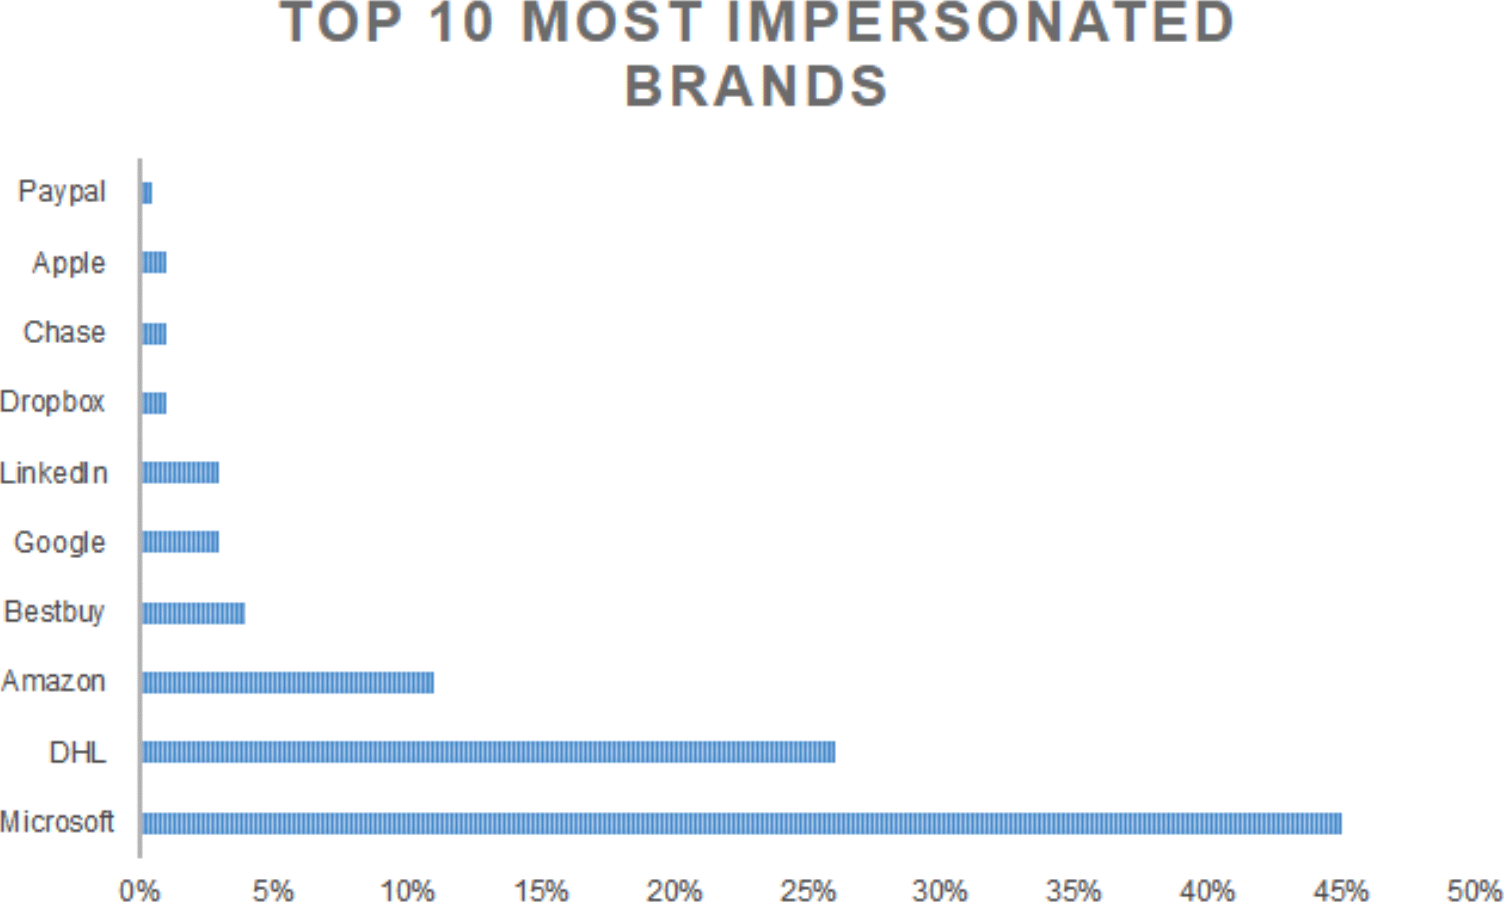 Q2 2021 Top 10 Most Impersonated Brands in Domains 15